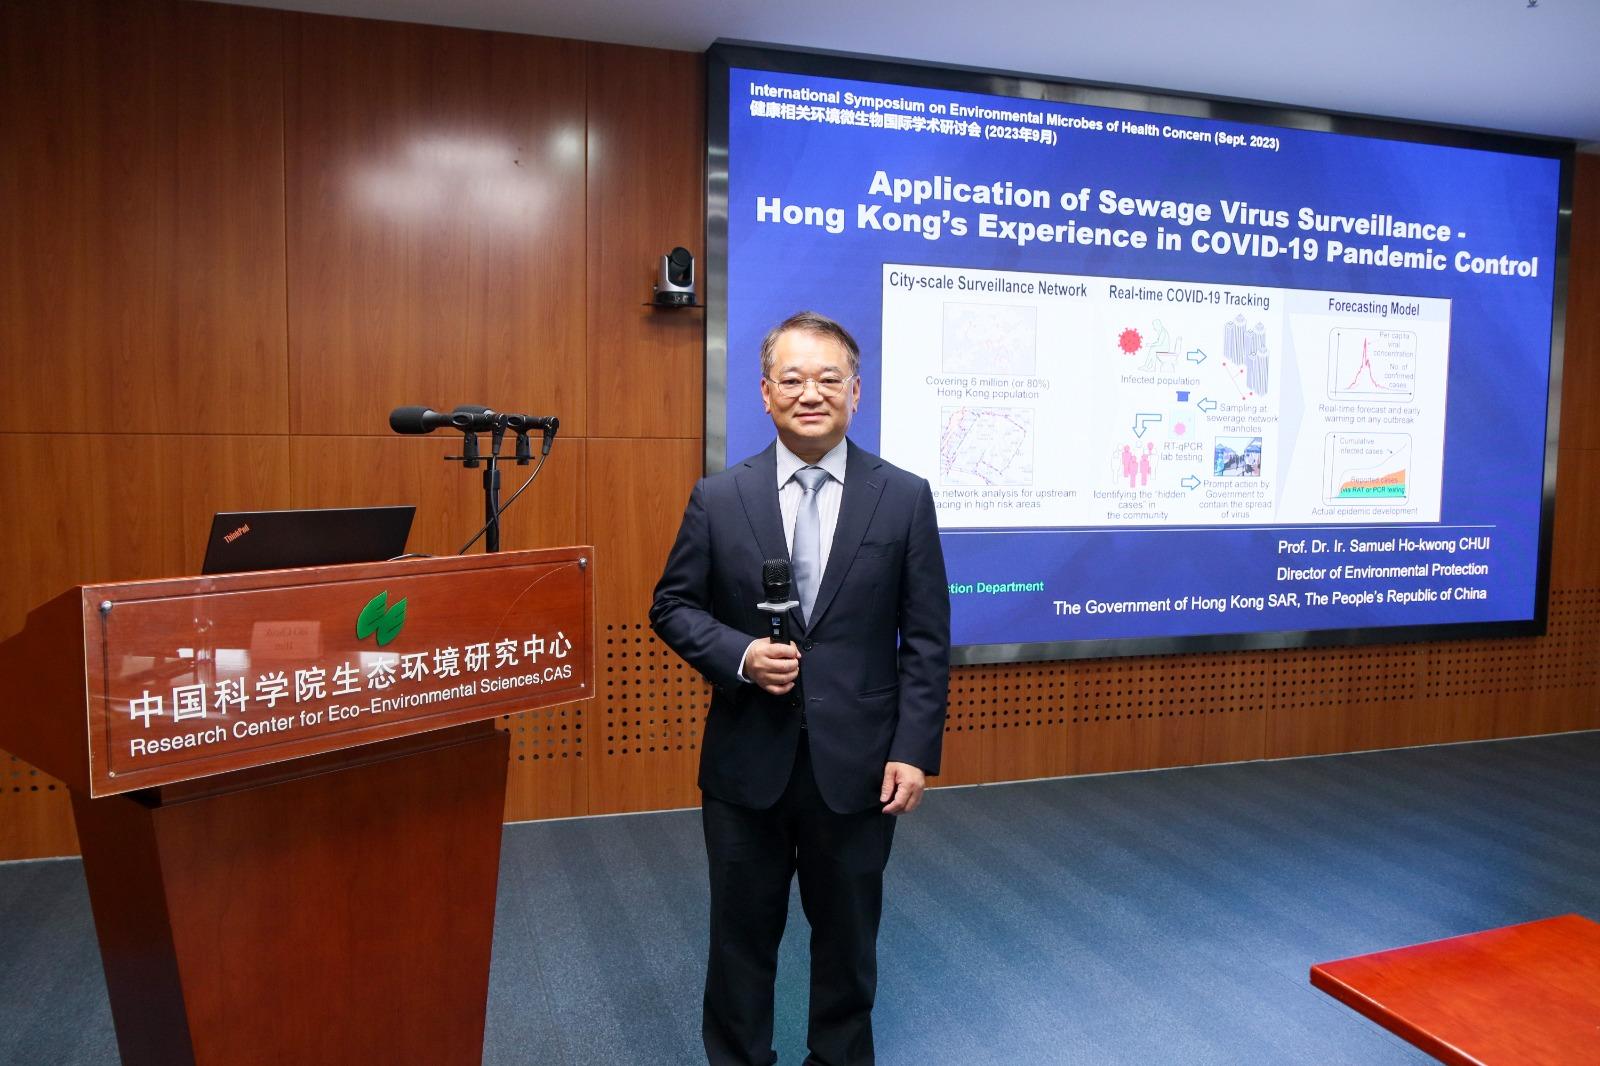 The Director of Environmental Protection, Dr Samuel Chui, today (September 7) attended the International Symposium on Environmental Microbes of Health Concern held under the Belt and Road Initiative in Beijing and visited the Ministry of Ecology and Environment. Photo shows Dr Chui promoting Hong Kong's sewage surveillance programme in successfully combating the COVID-19 pandemic at the symposium.
